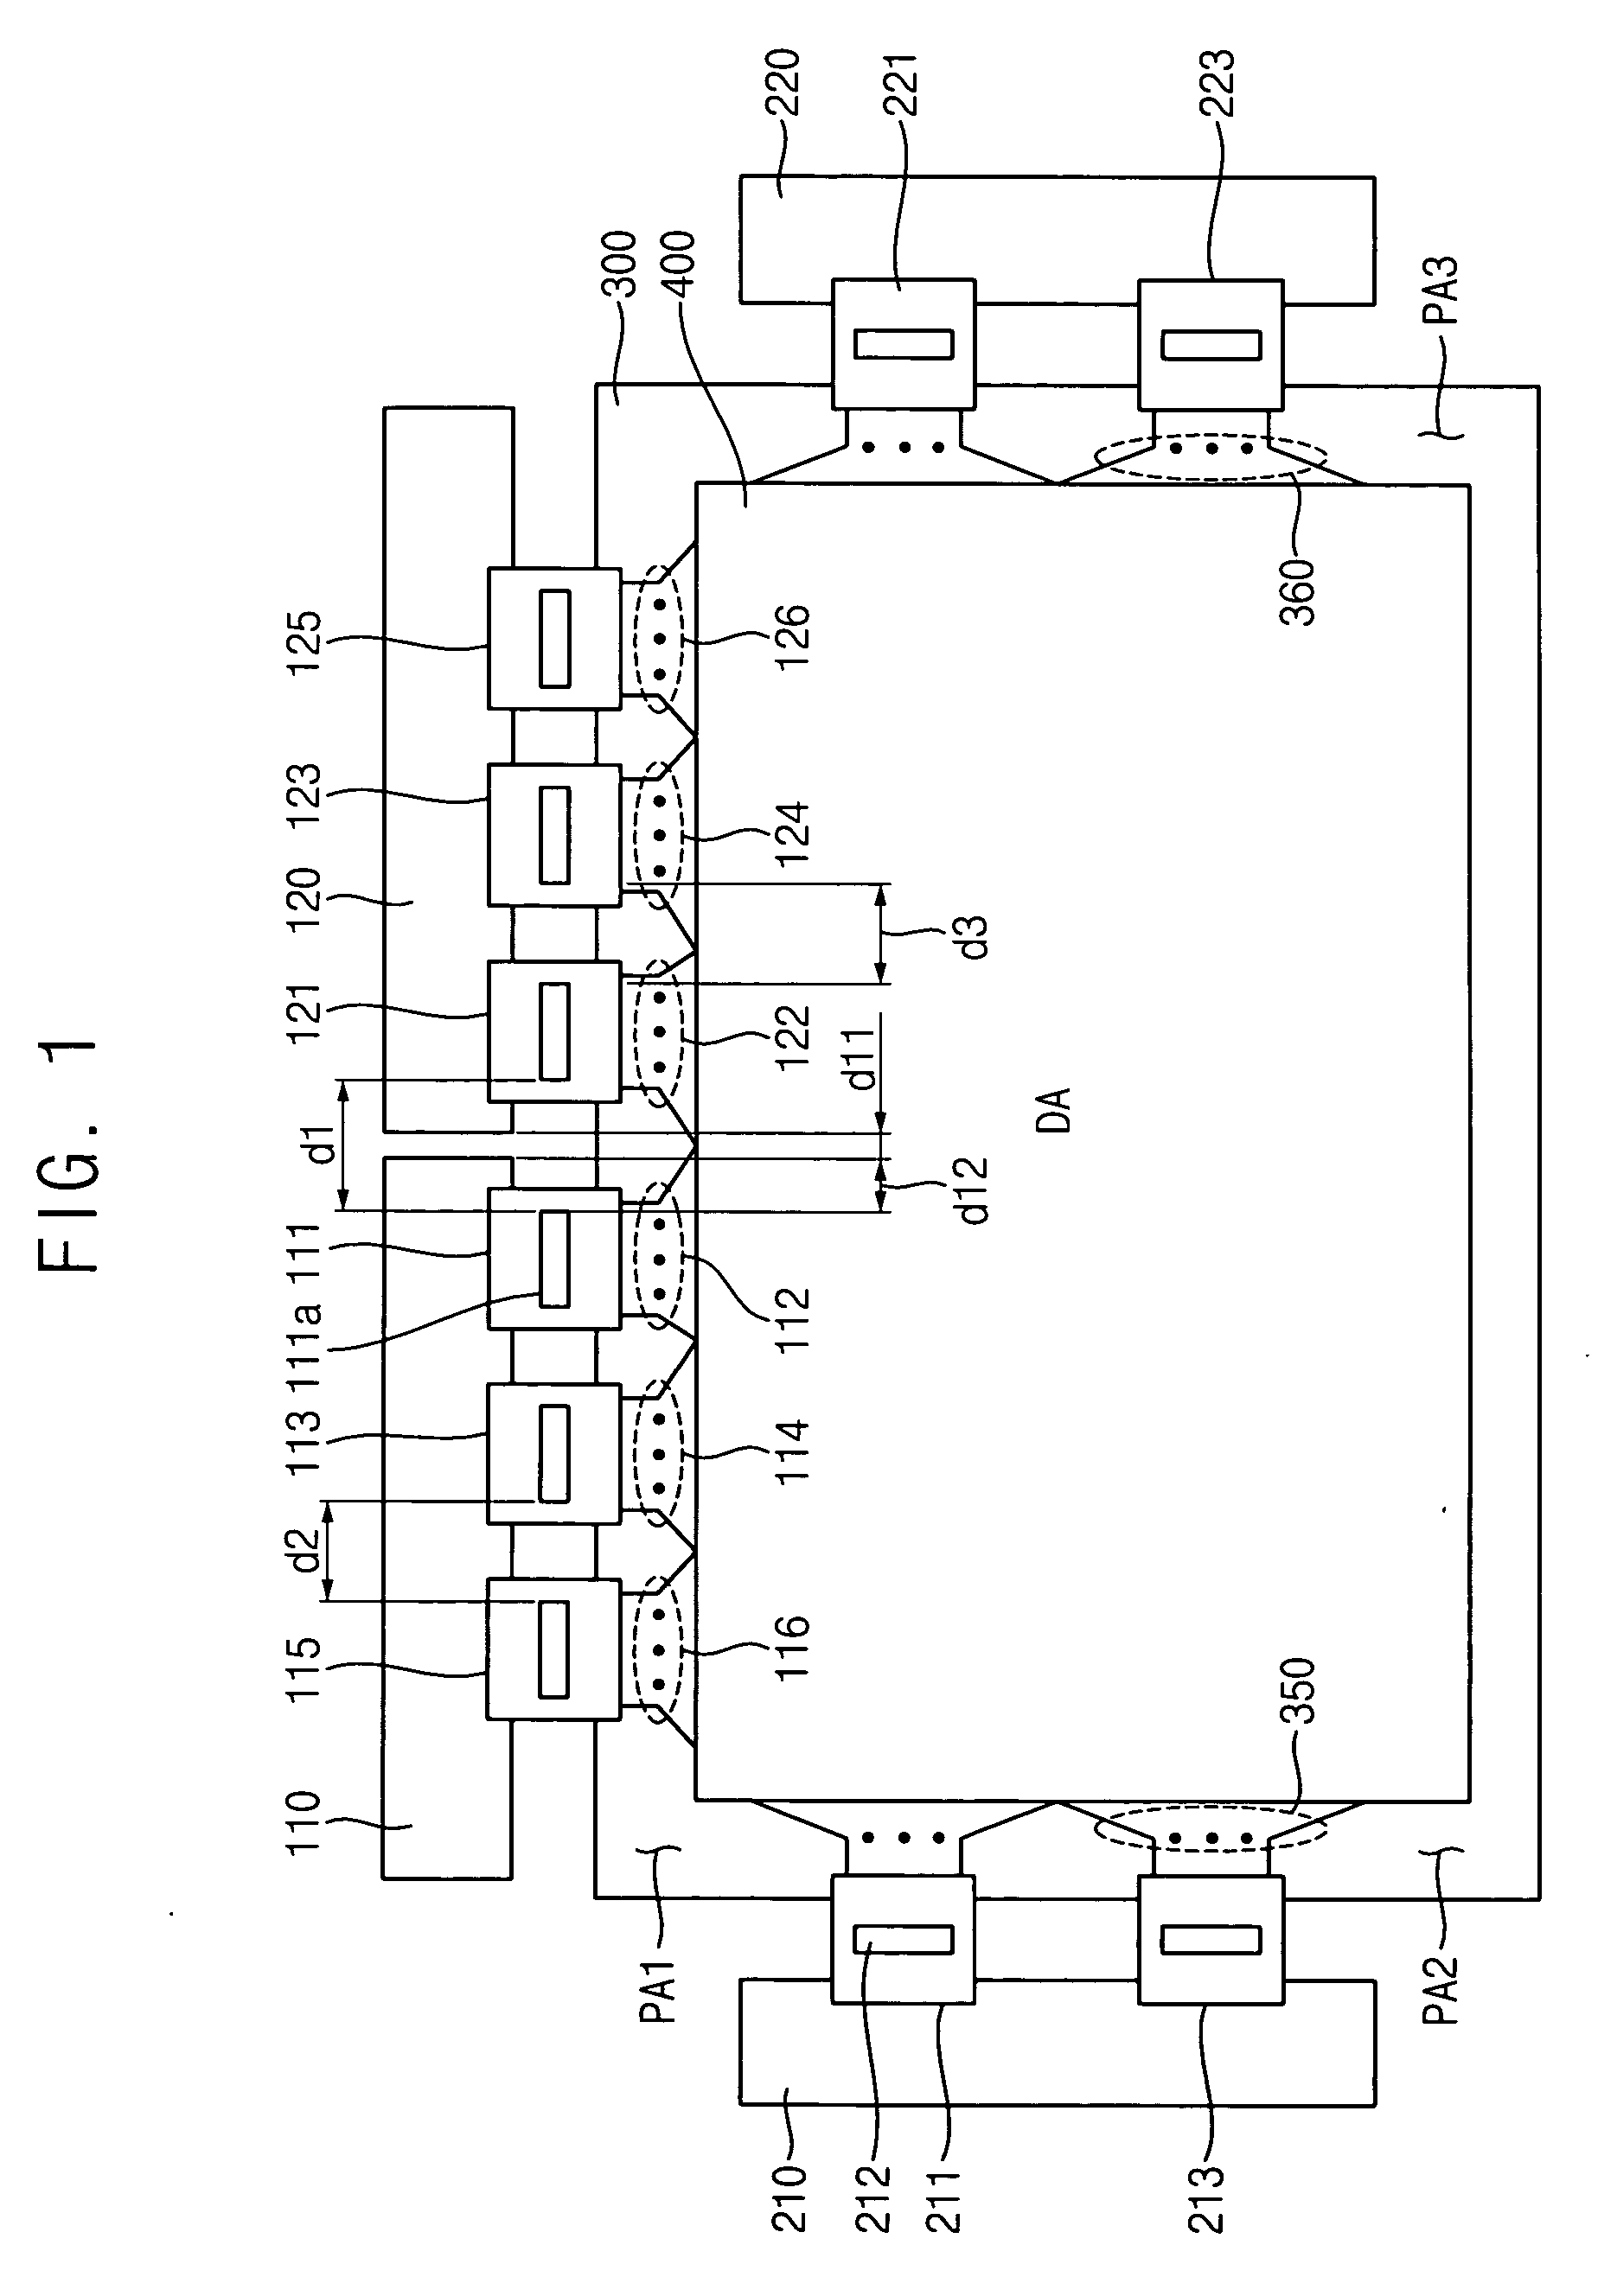 Display substrate, display device having the same, and method thereof